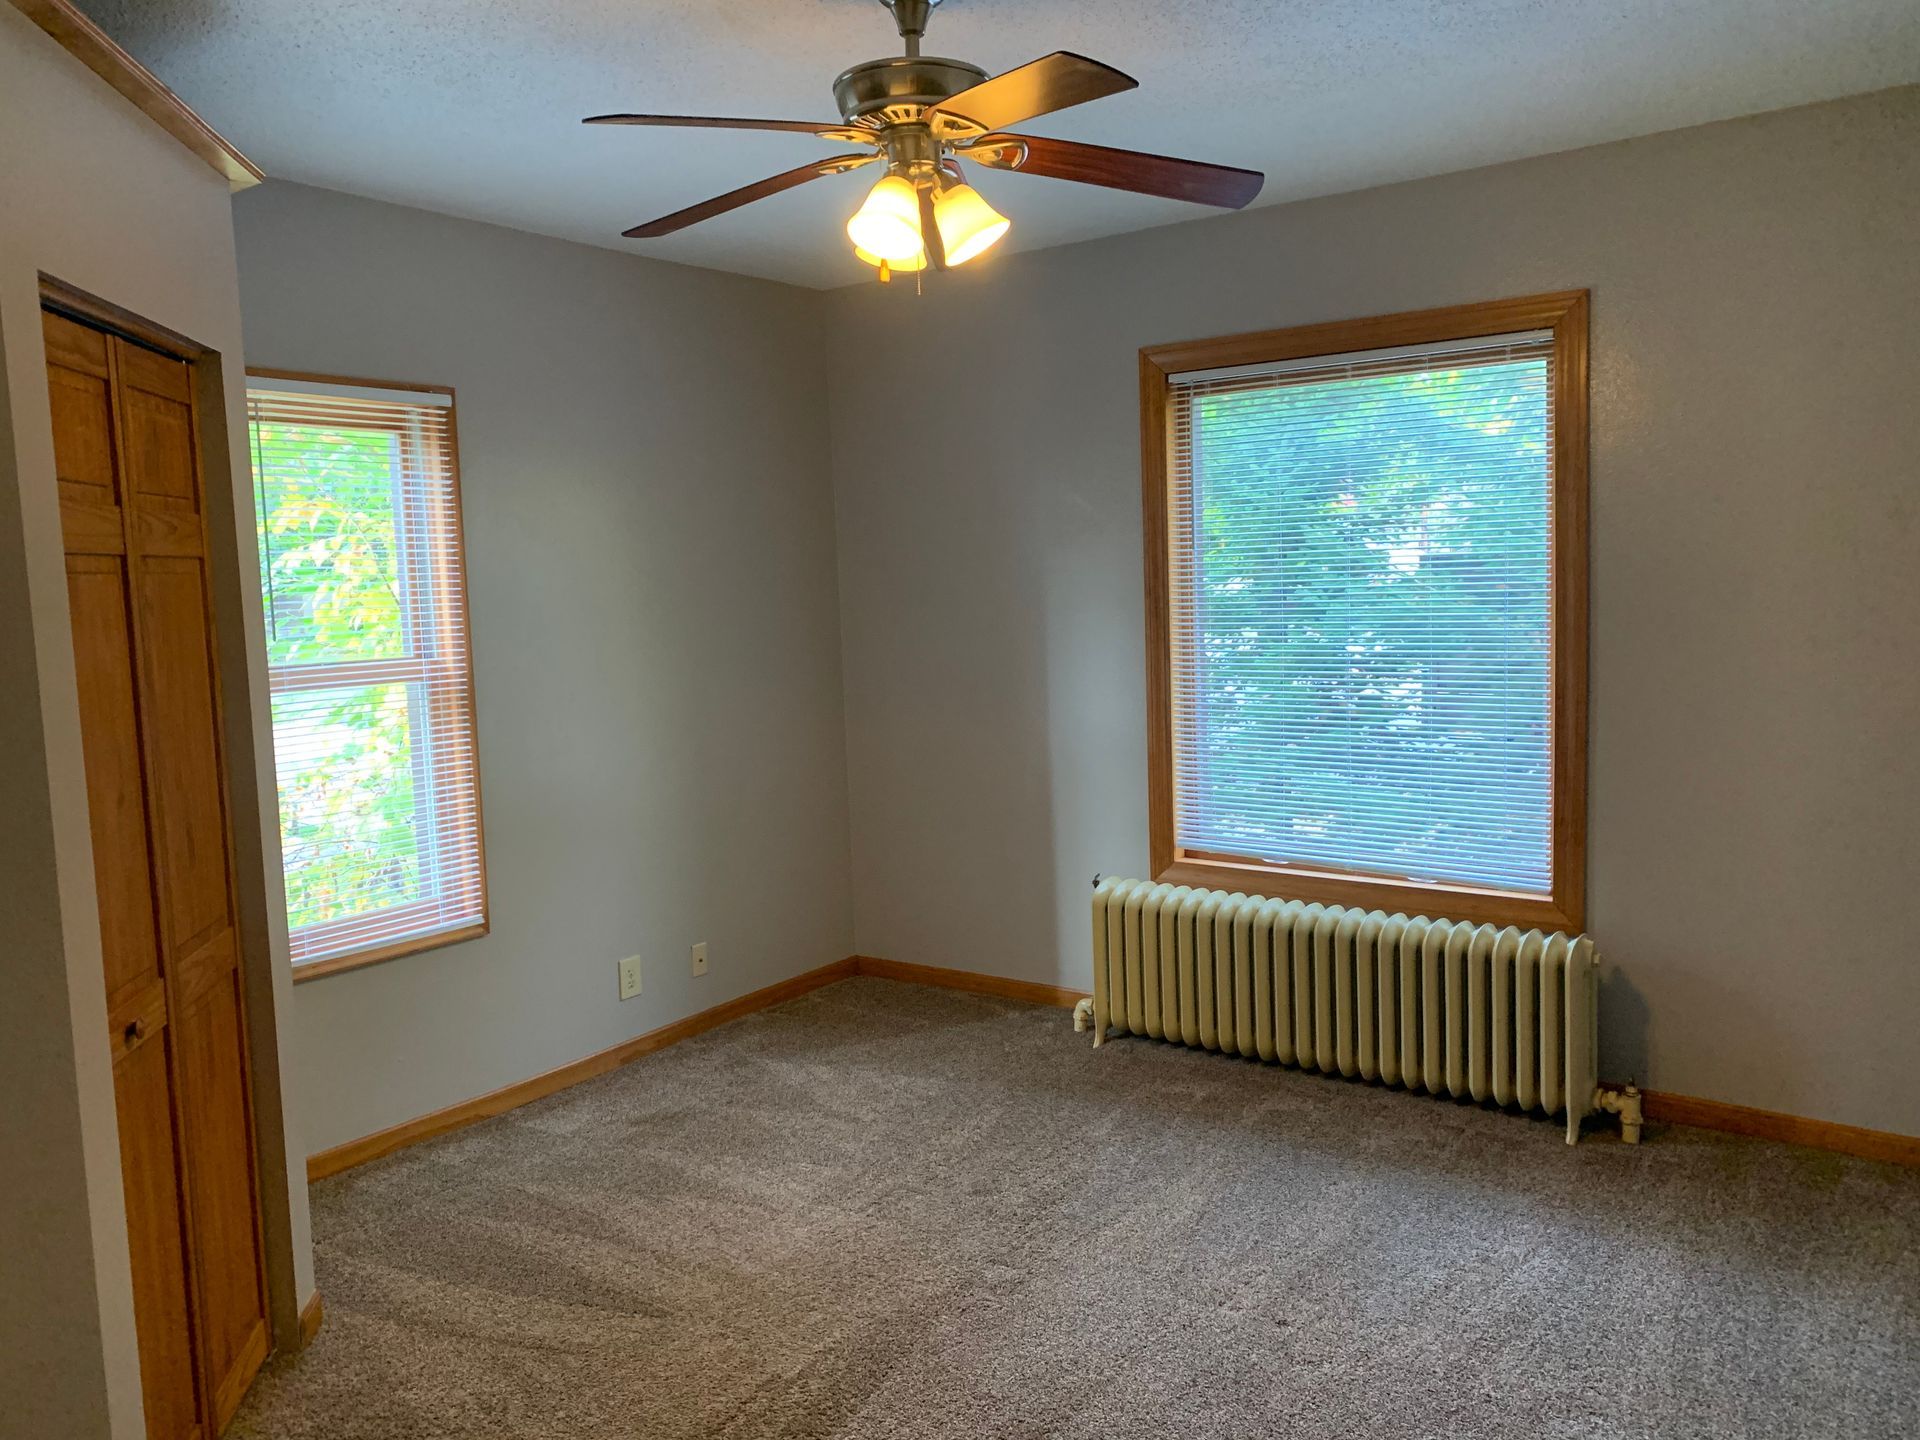 An empty room with a ceiling fan and a window.